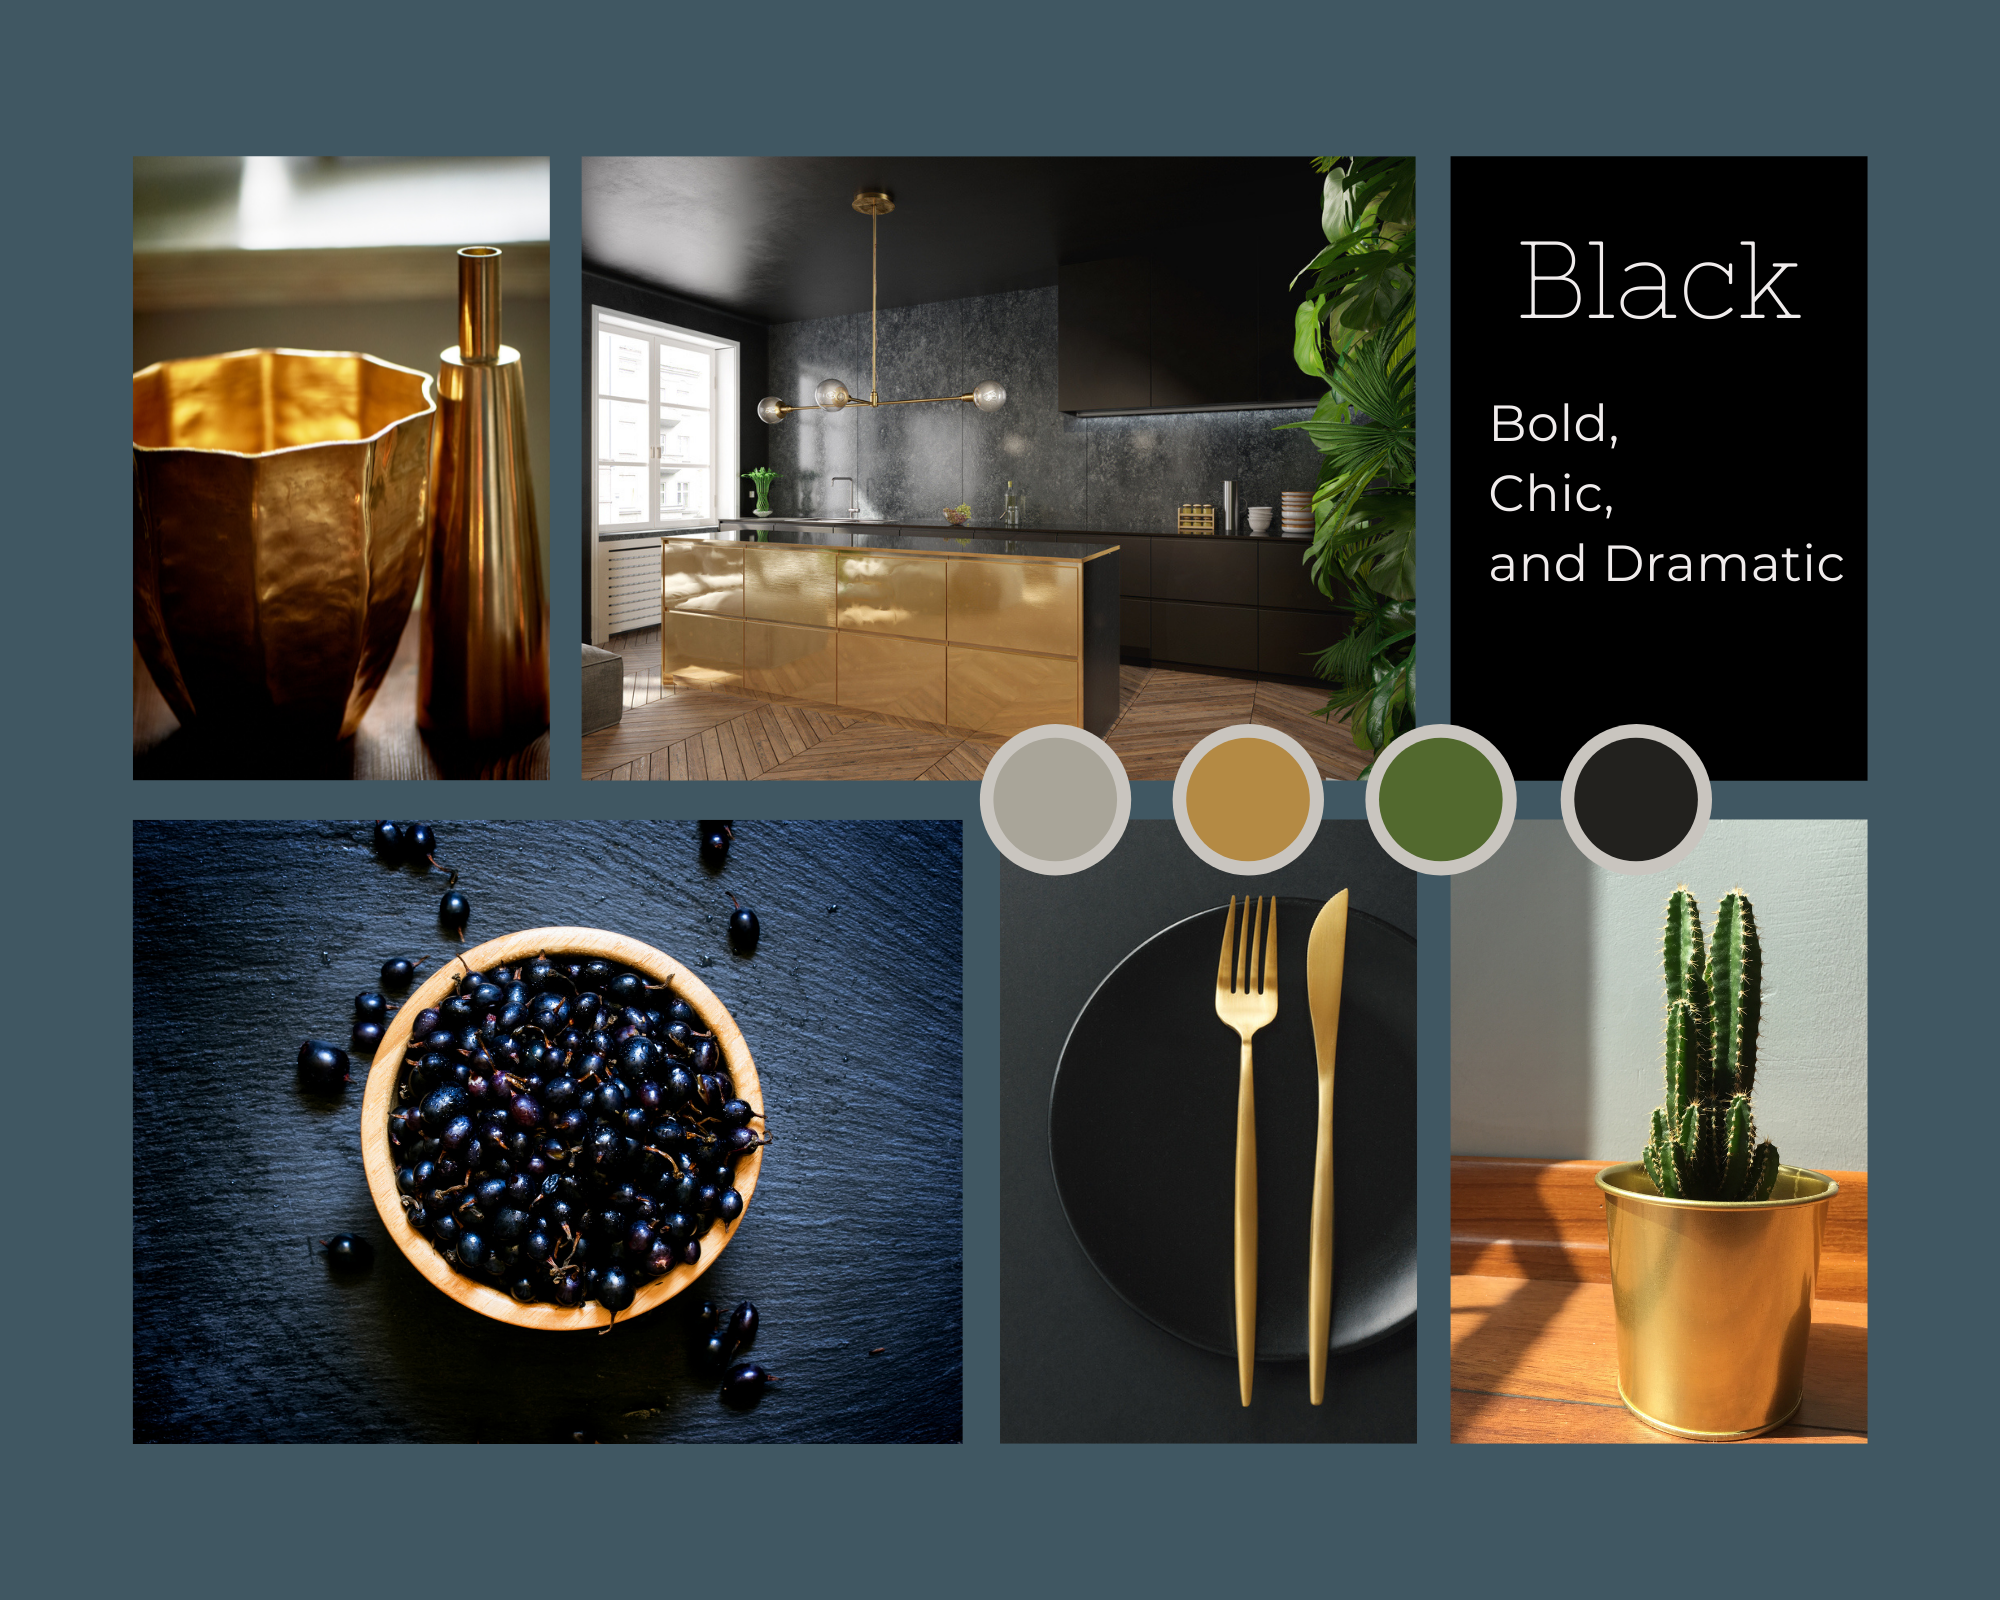 Black – Bold, Chic, and Dramatic